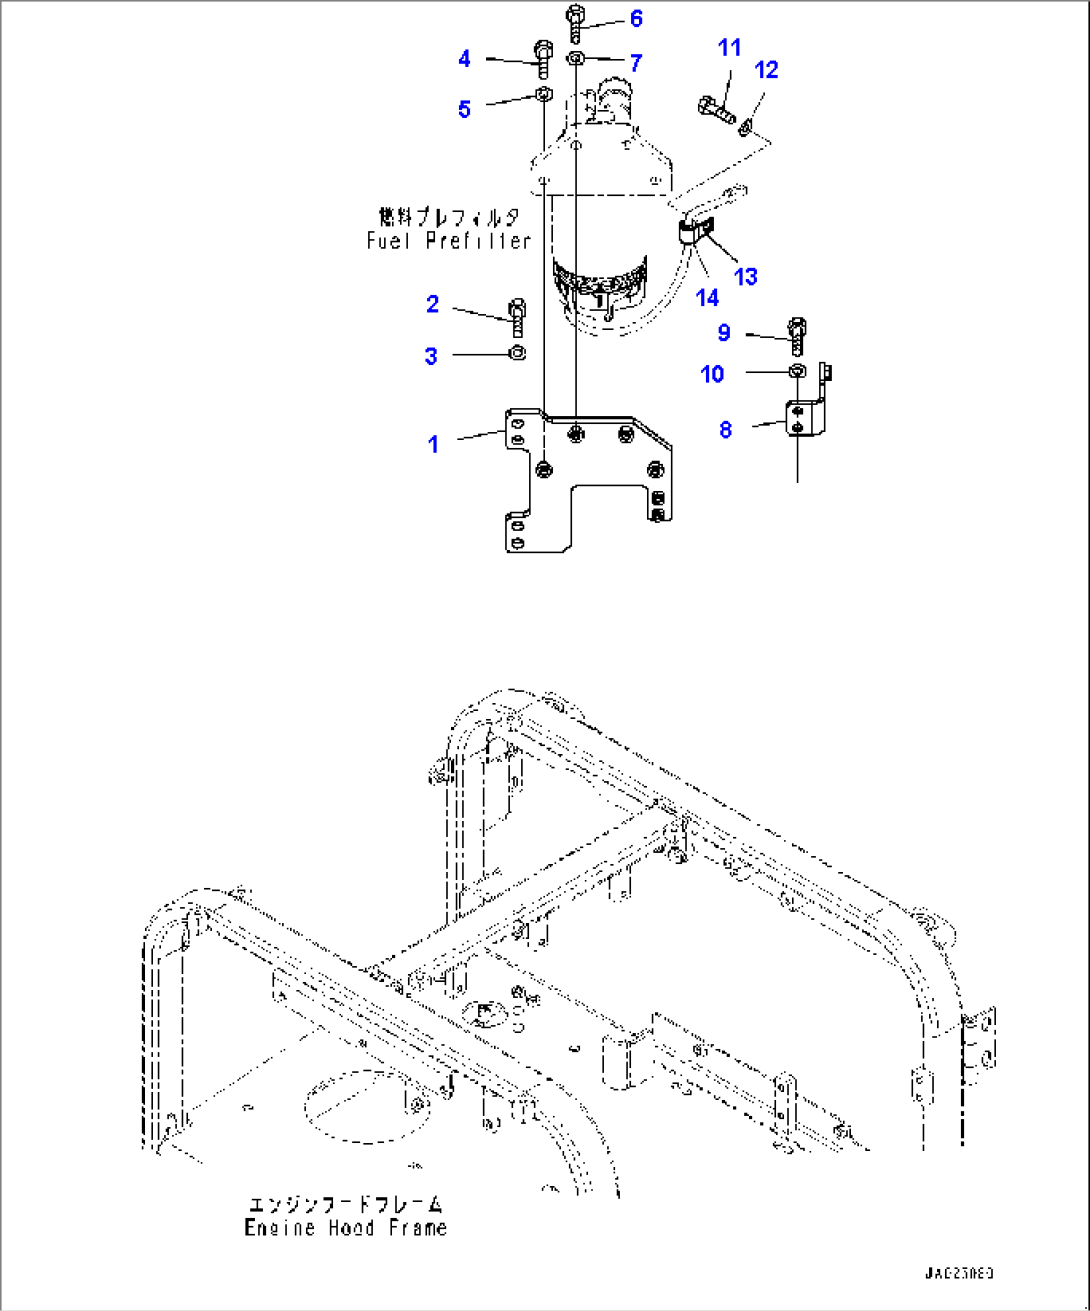 Fuel Piping, Fuel Prefilter Mounting (#1001-)